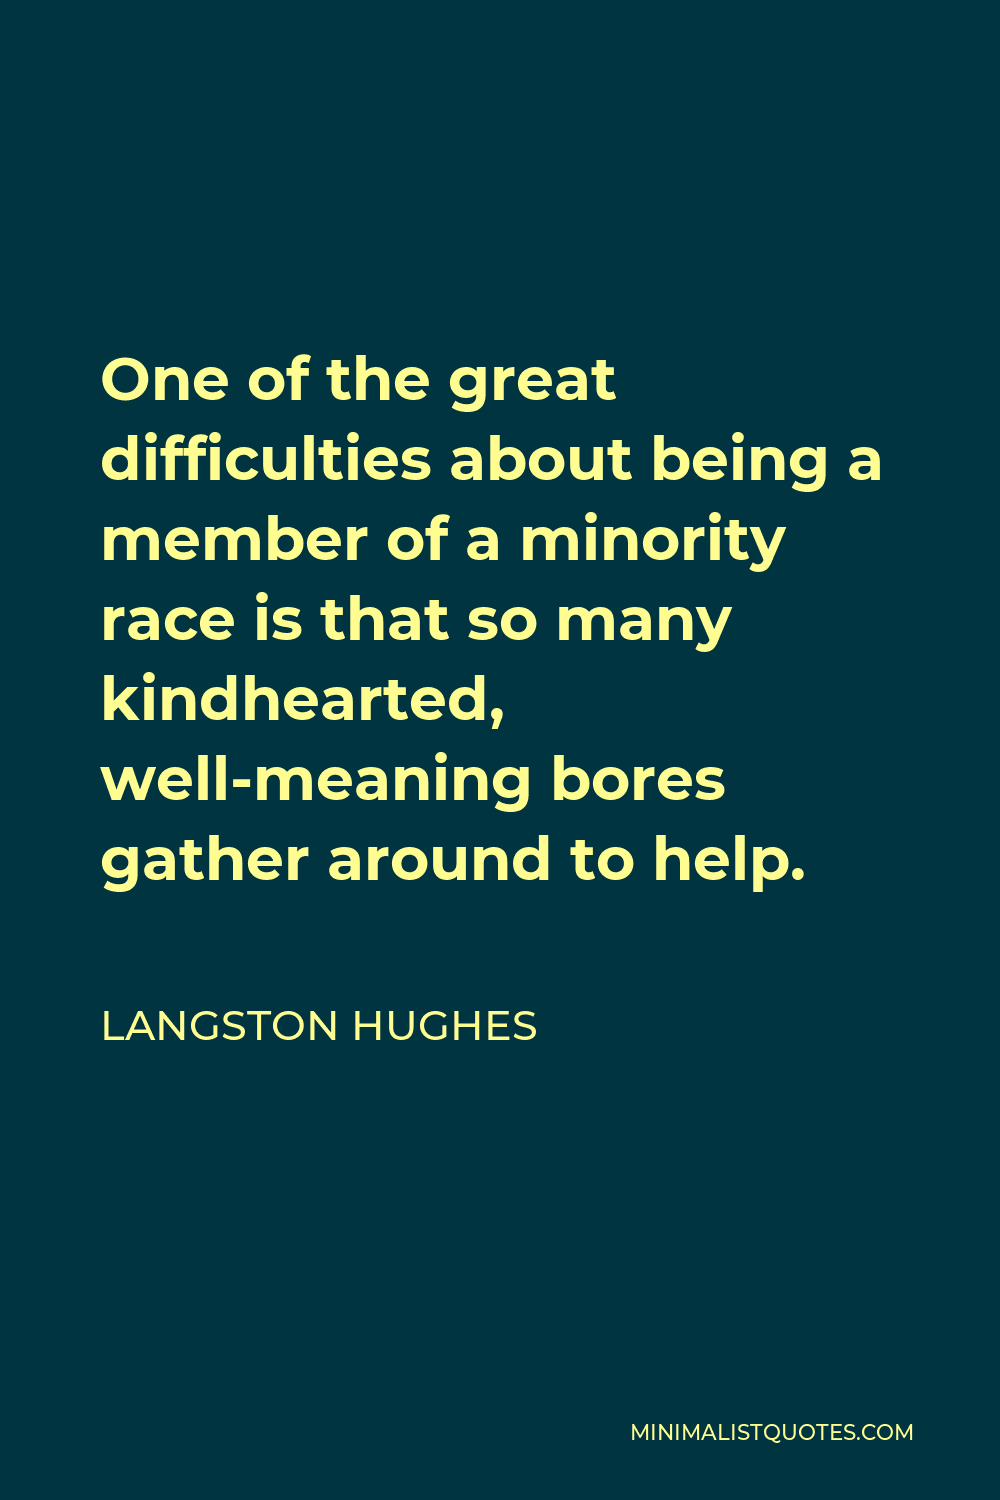 Langston Hughes Quote - One of the great difficulties about being a member of a minority race is that so many kindhearted, well-meaning bores gather around to help.